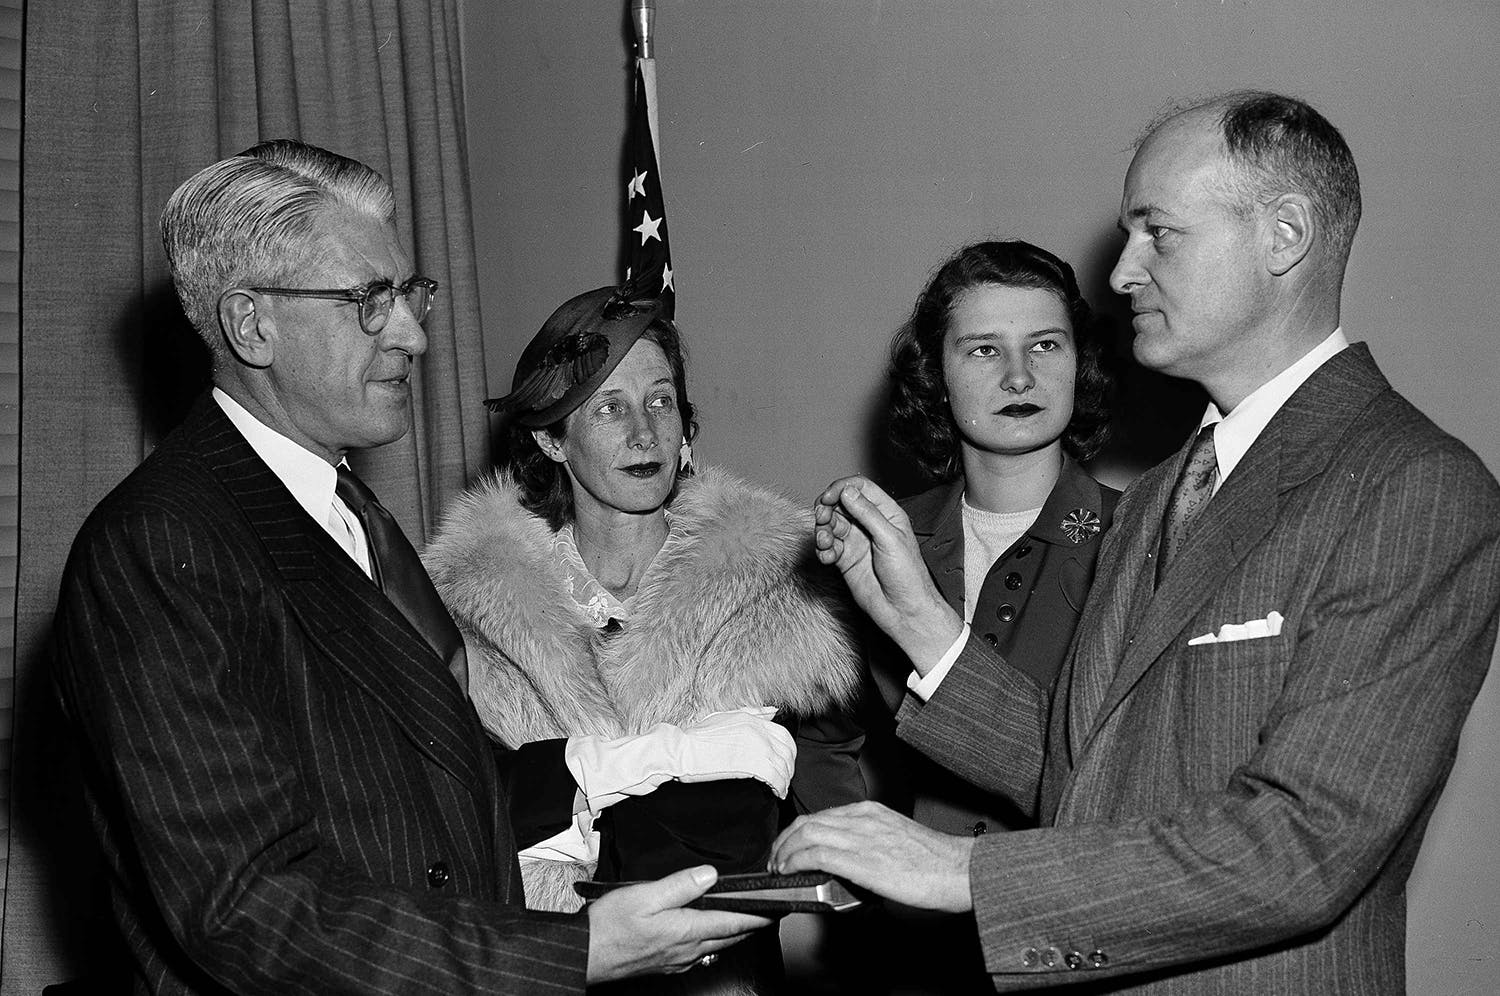 George F. Kennan becomes Ambassador to the Soviet Union in a State Department ceremony April 2, 1952. Kennan, left, reenacts the swearing in by Raymond Muir, protocol officer, with Mrs. Kennan (second from left), and daughter Grace, 19, looking on. (AP Photo/Byron Rollins)